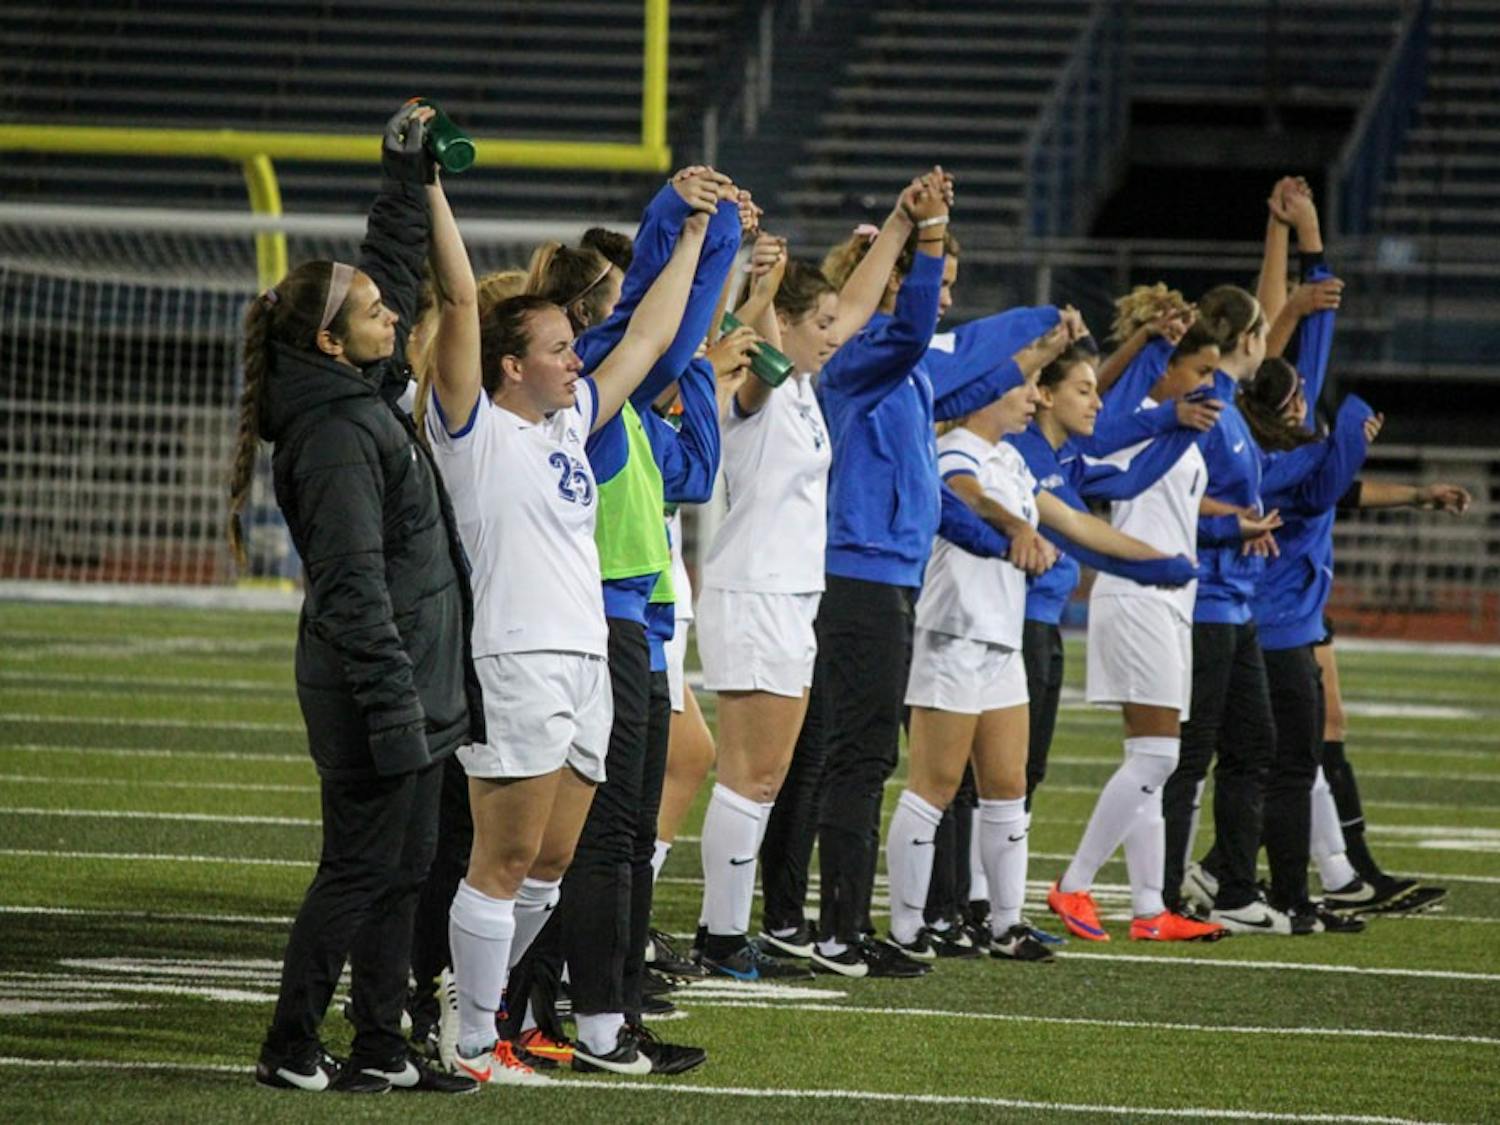 UB women's soccer team hold hands on the UB stadium field&nbsp;after a game.&nbsp;The team looks to close out the rest of the season with three wins so they’re ready for the playoffs.